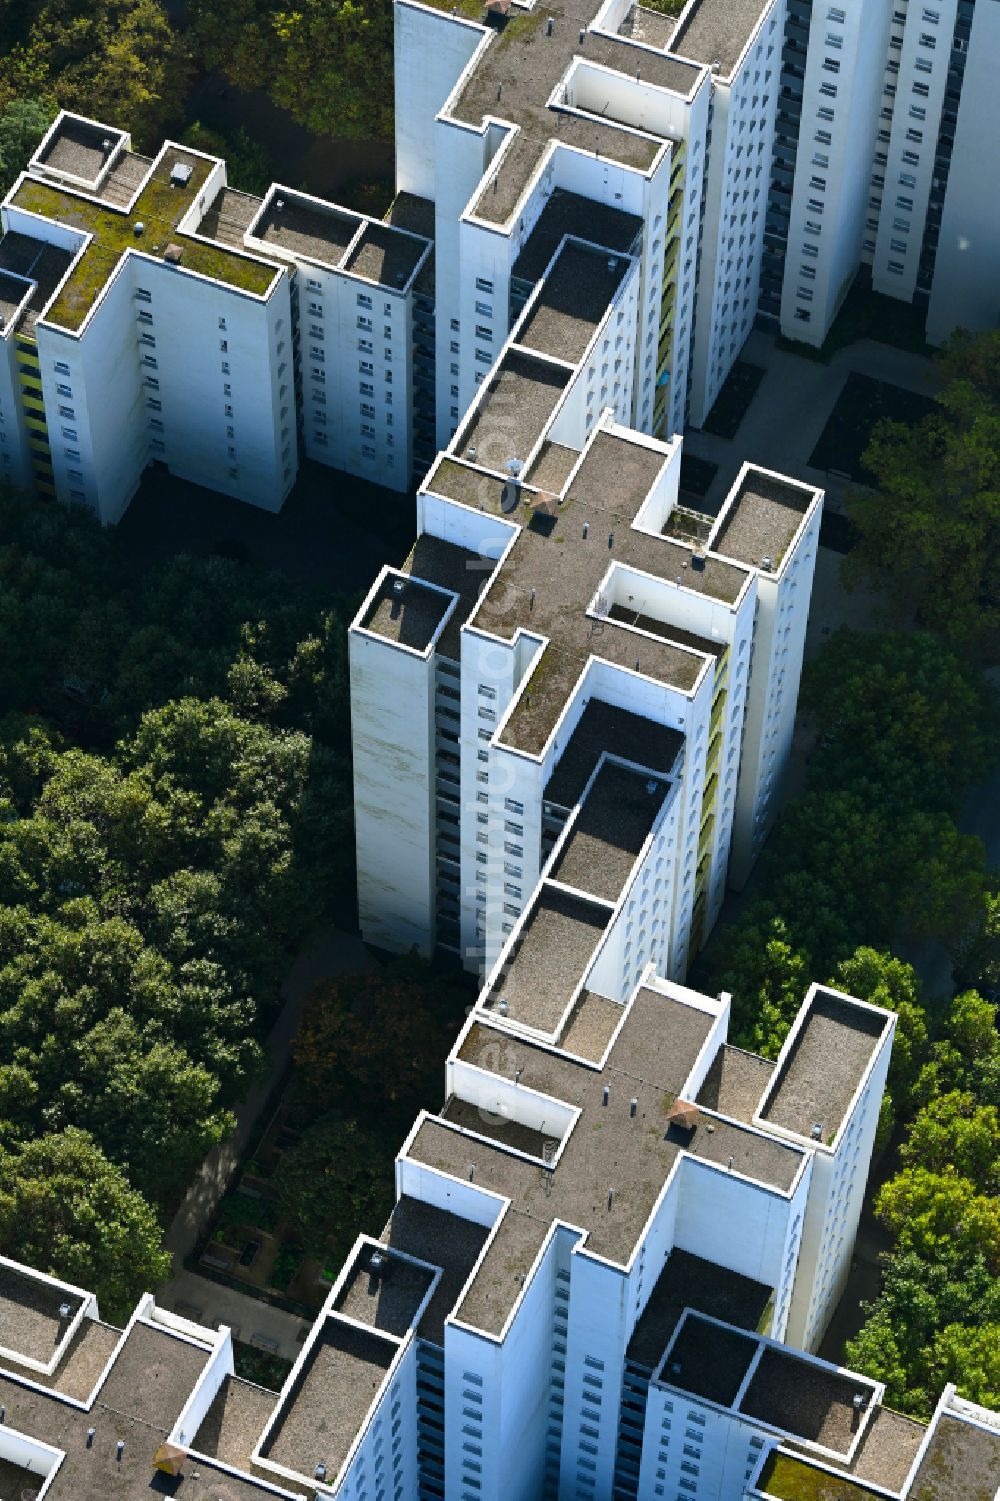 Aerial image Berlin - Skyscrapers in the residential area of industrially manufactured settlement on street Wilhelmsruher Damm in the district Maerkisches Viertel in Berlin, Germany